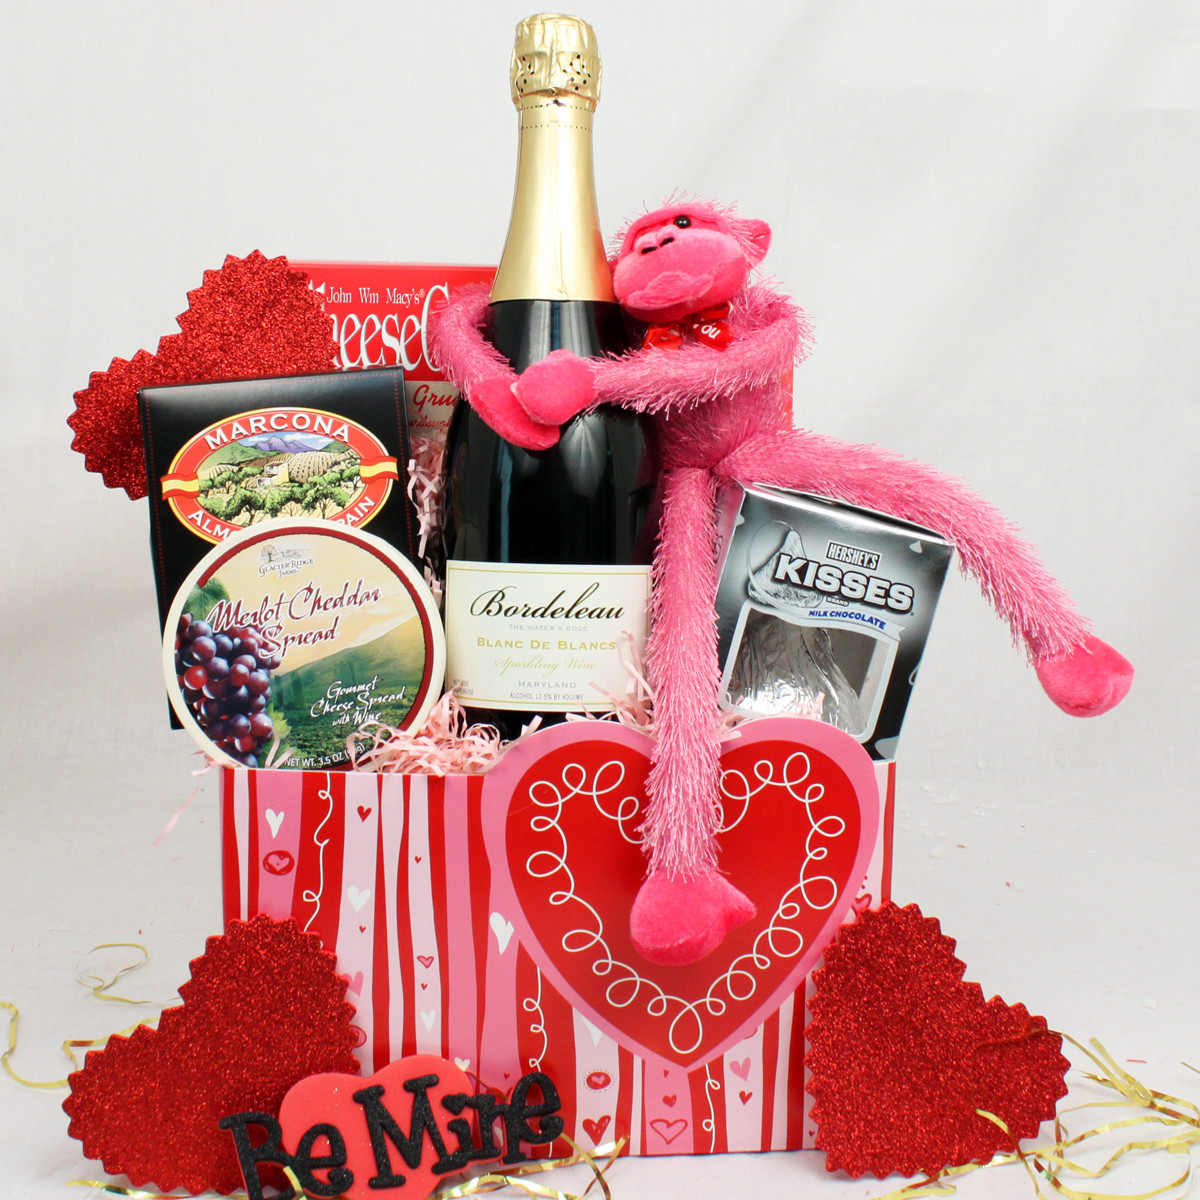 Valentines Gift Ideas For Her Pinterest
 Creative and Thoughtful Valentine’s Day Gifts for Her